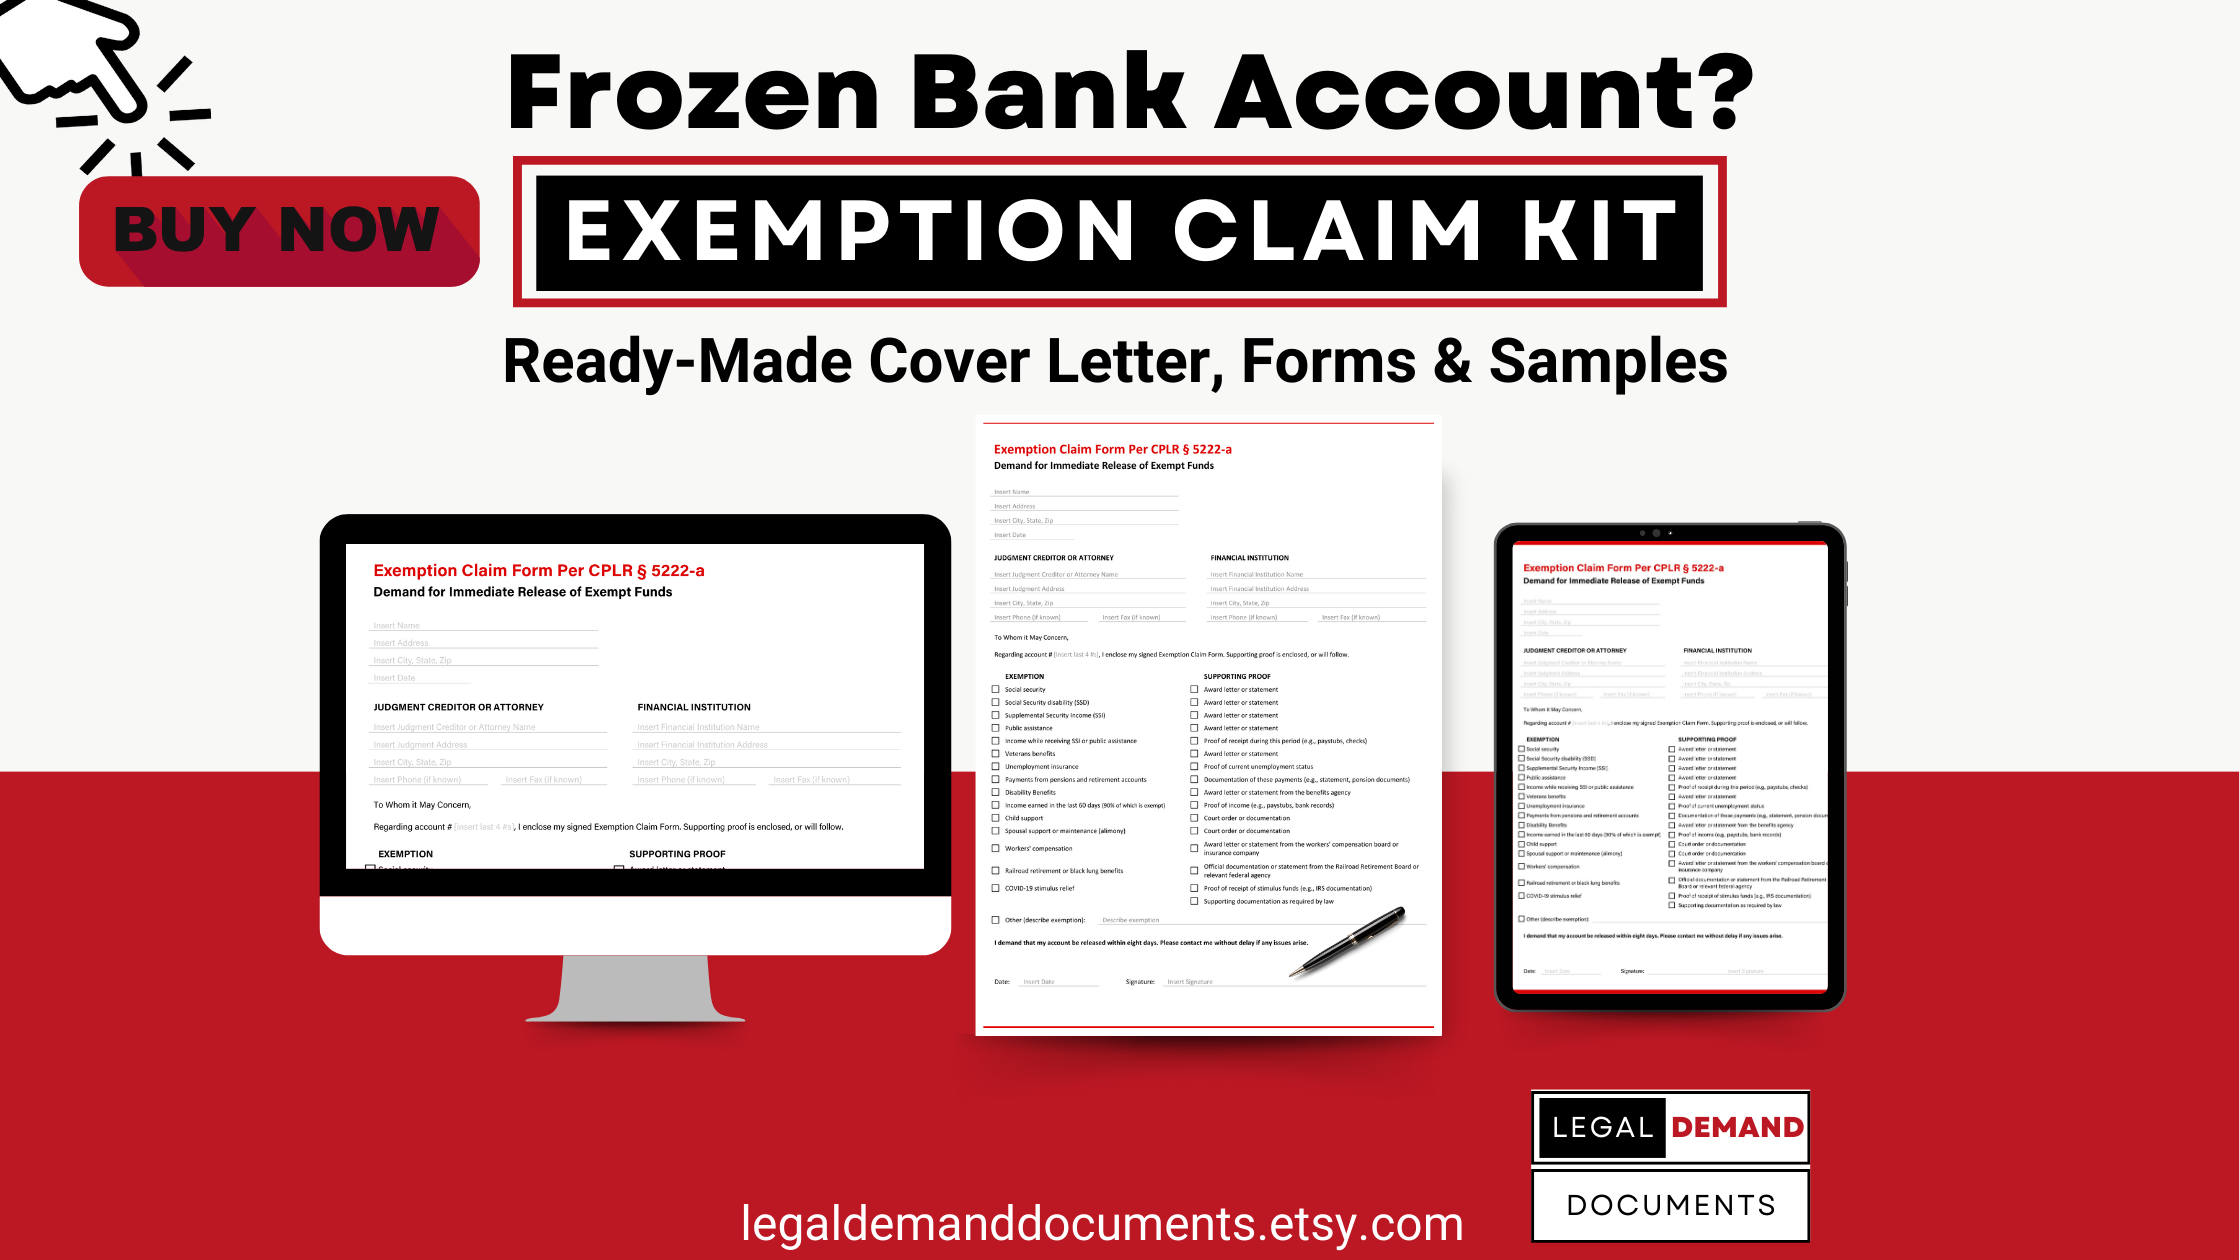 A graphic showing a fillable PDF and fillable Word form document of an exemption claim form and cover letter to unfreeze bank holds under New York CPLR § 5222-a 